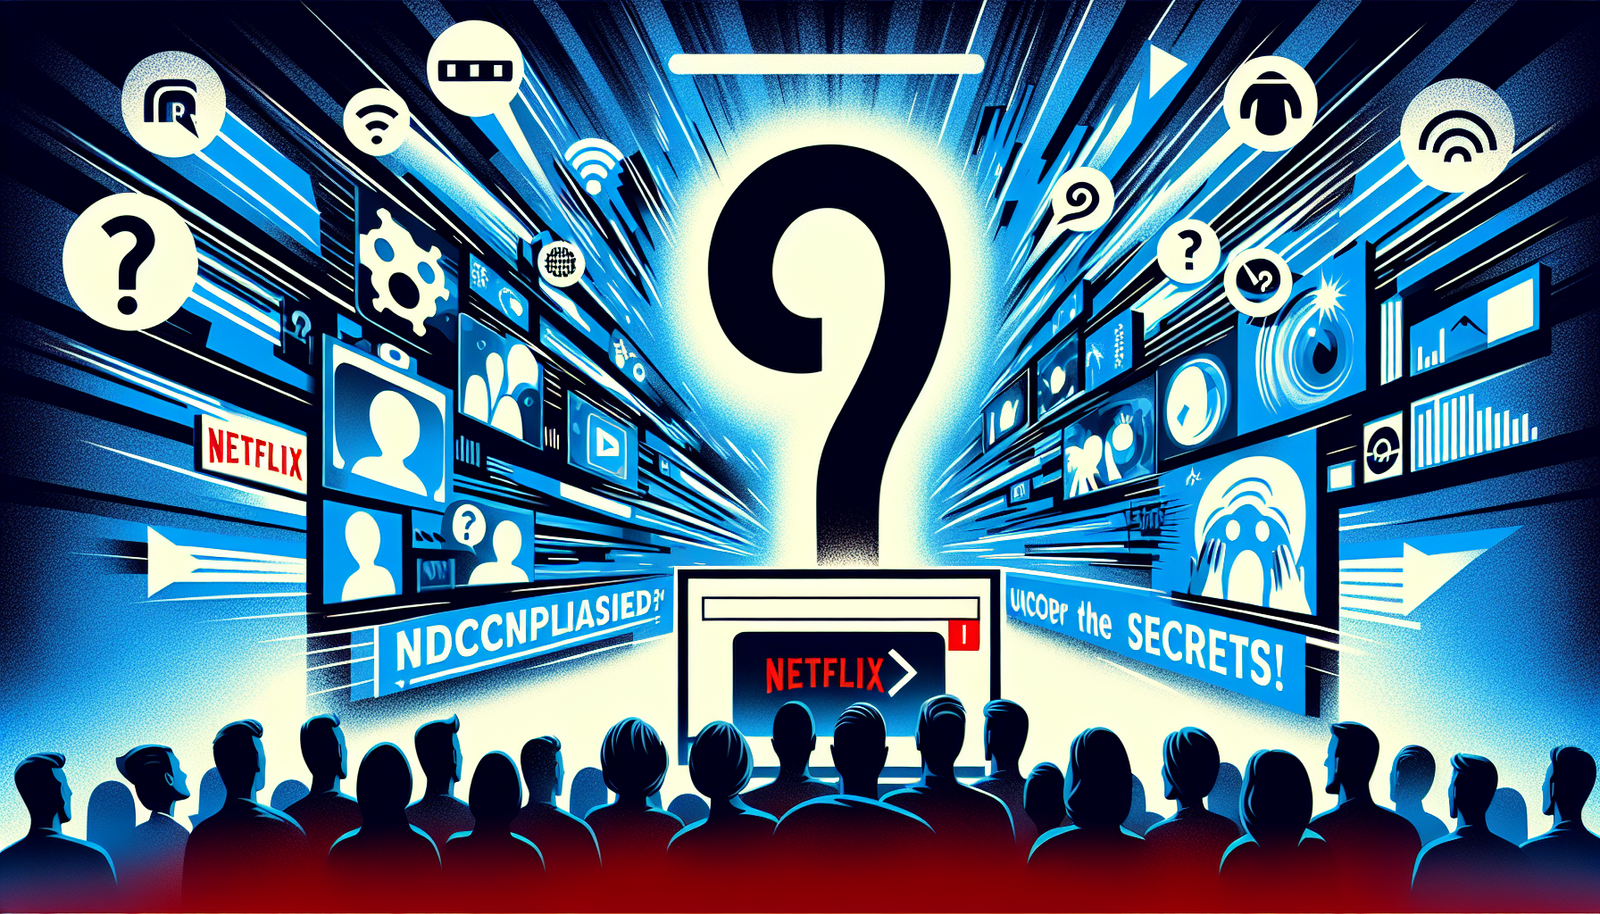 discover if netflix's latest ratings signal the end of streaming as we know it with insightful analysis and commentary.